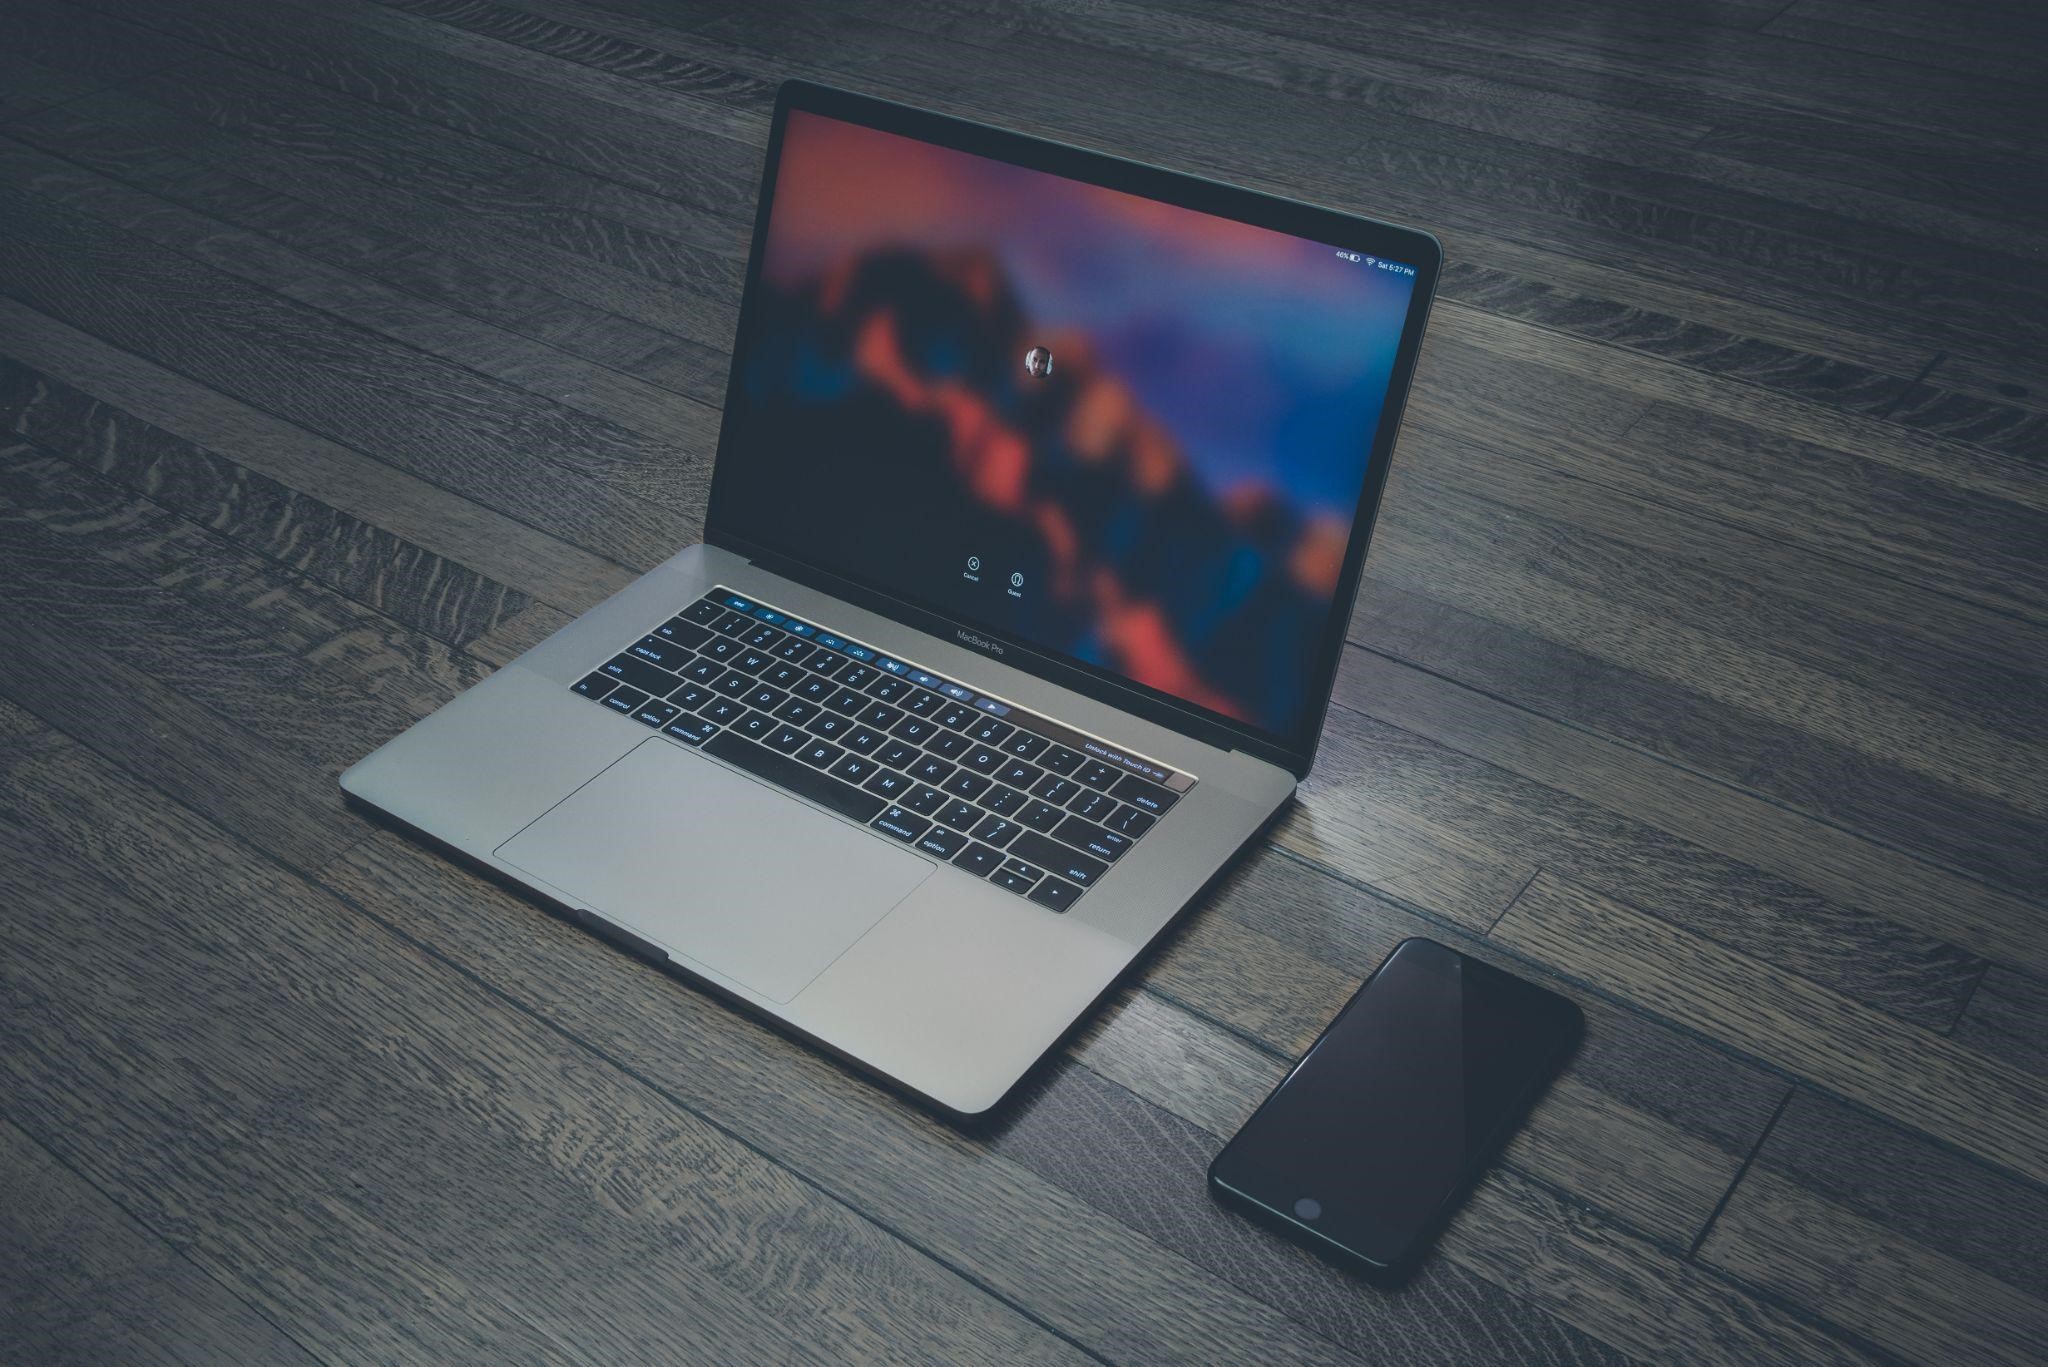 The new MacBook Pro design (yes! There's a notch).